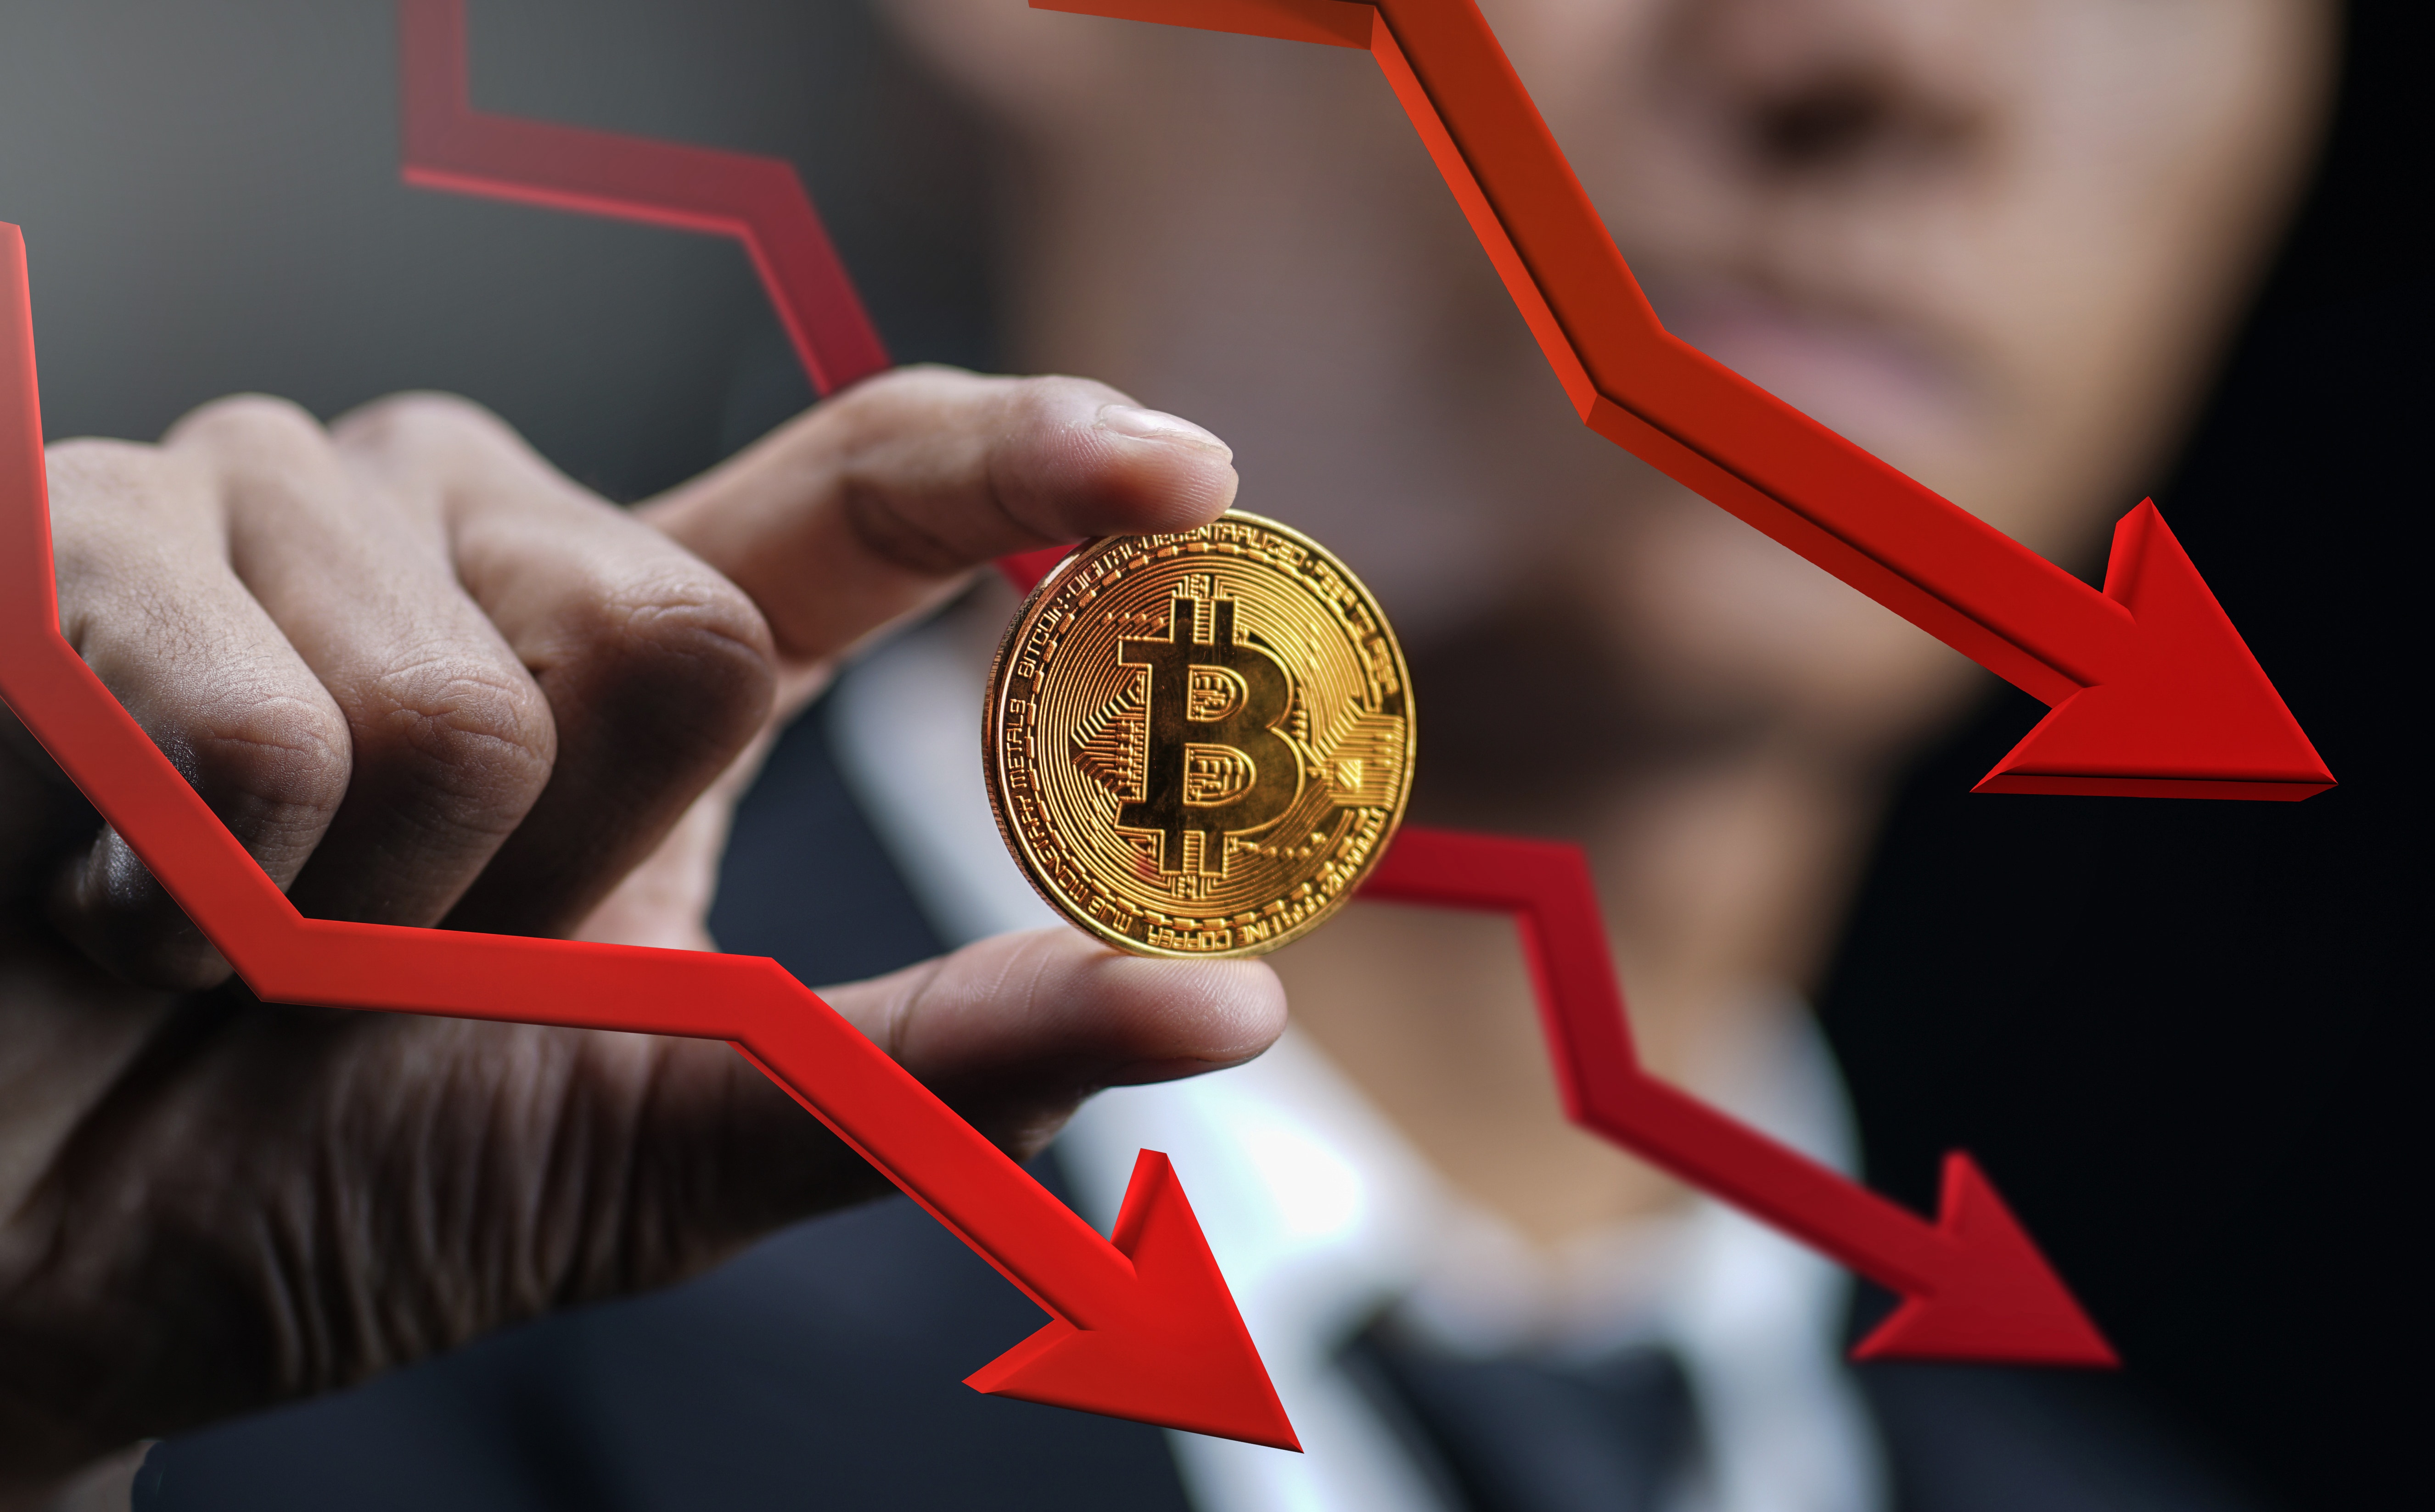 Bitcoin, Ethereum, Dogecoin Plunge: Investors Jittery, But Will Crypto Pain Ease In Week Ahead?